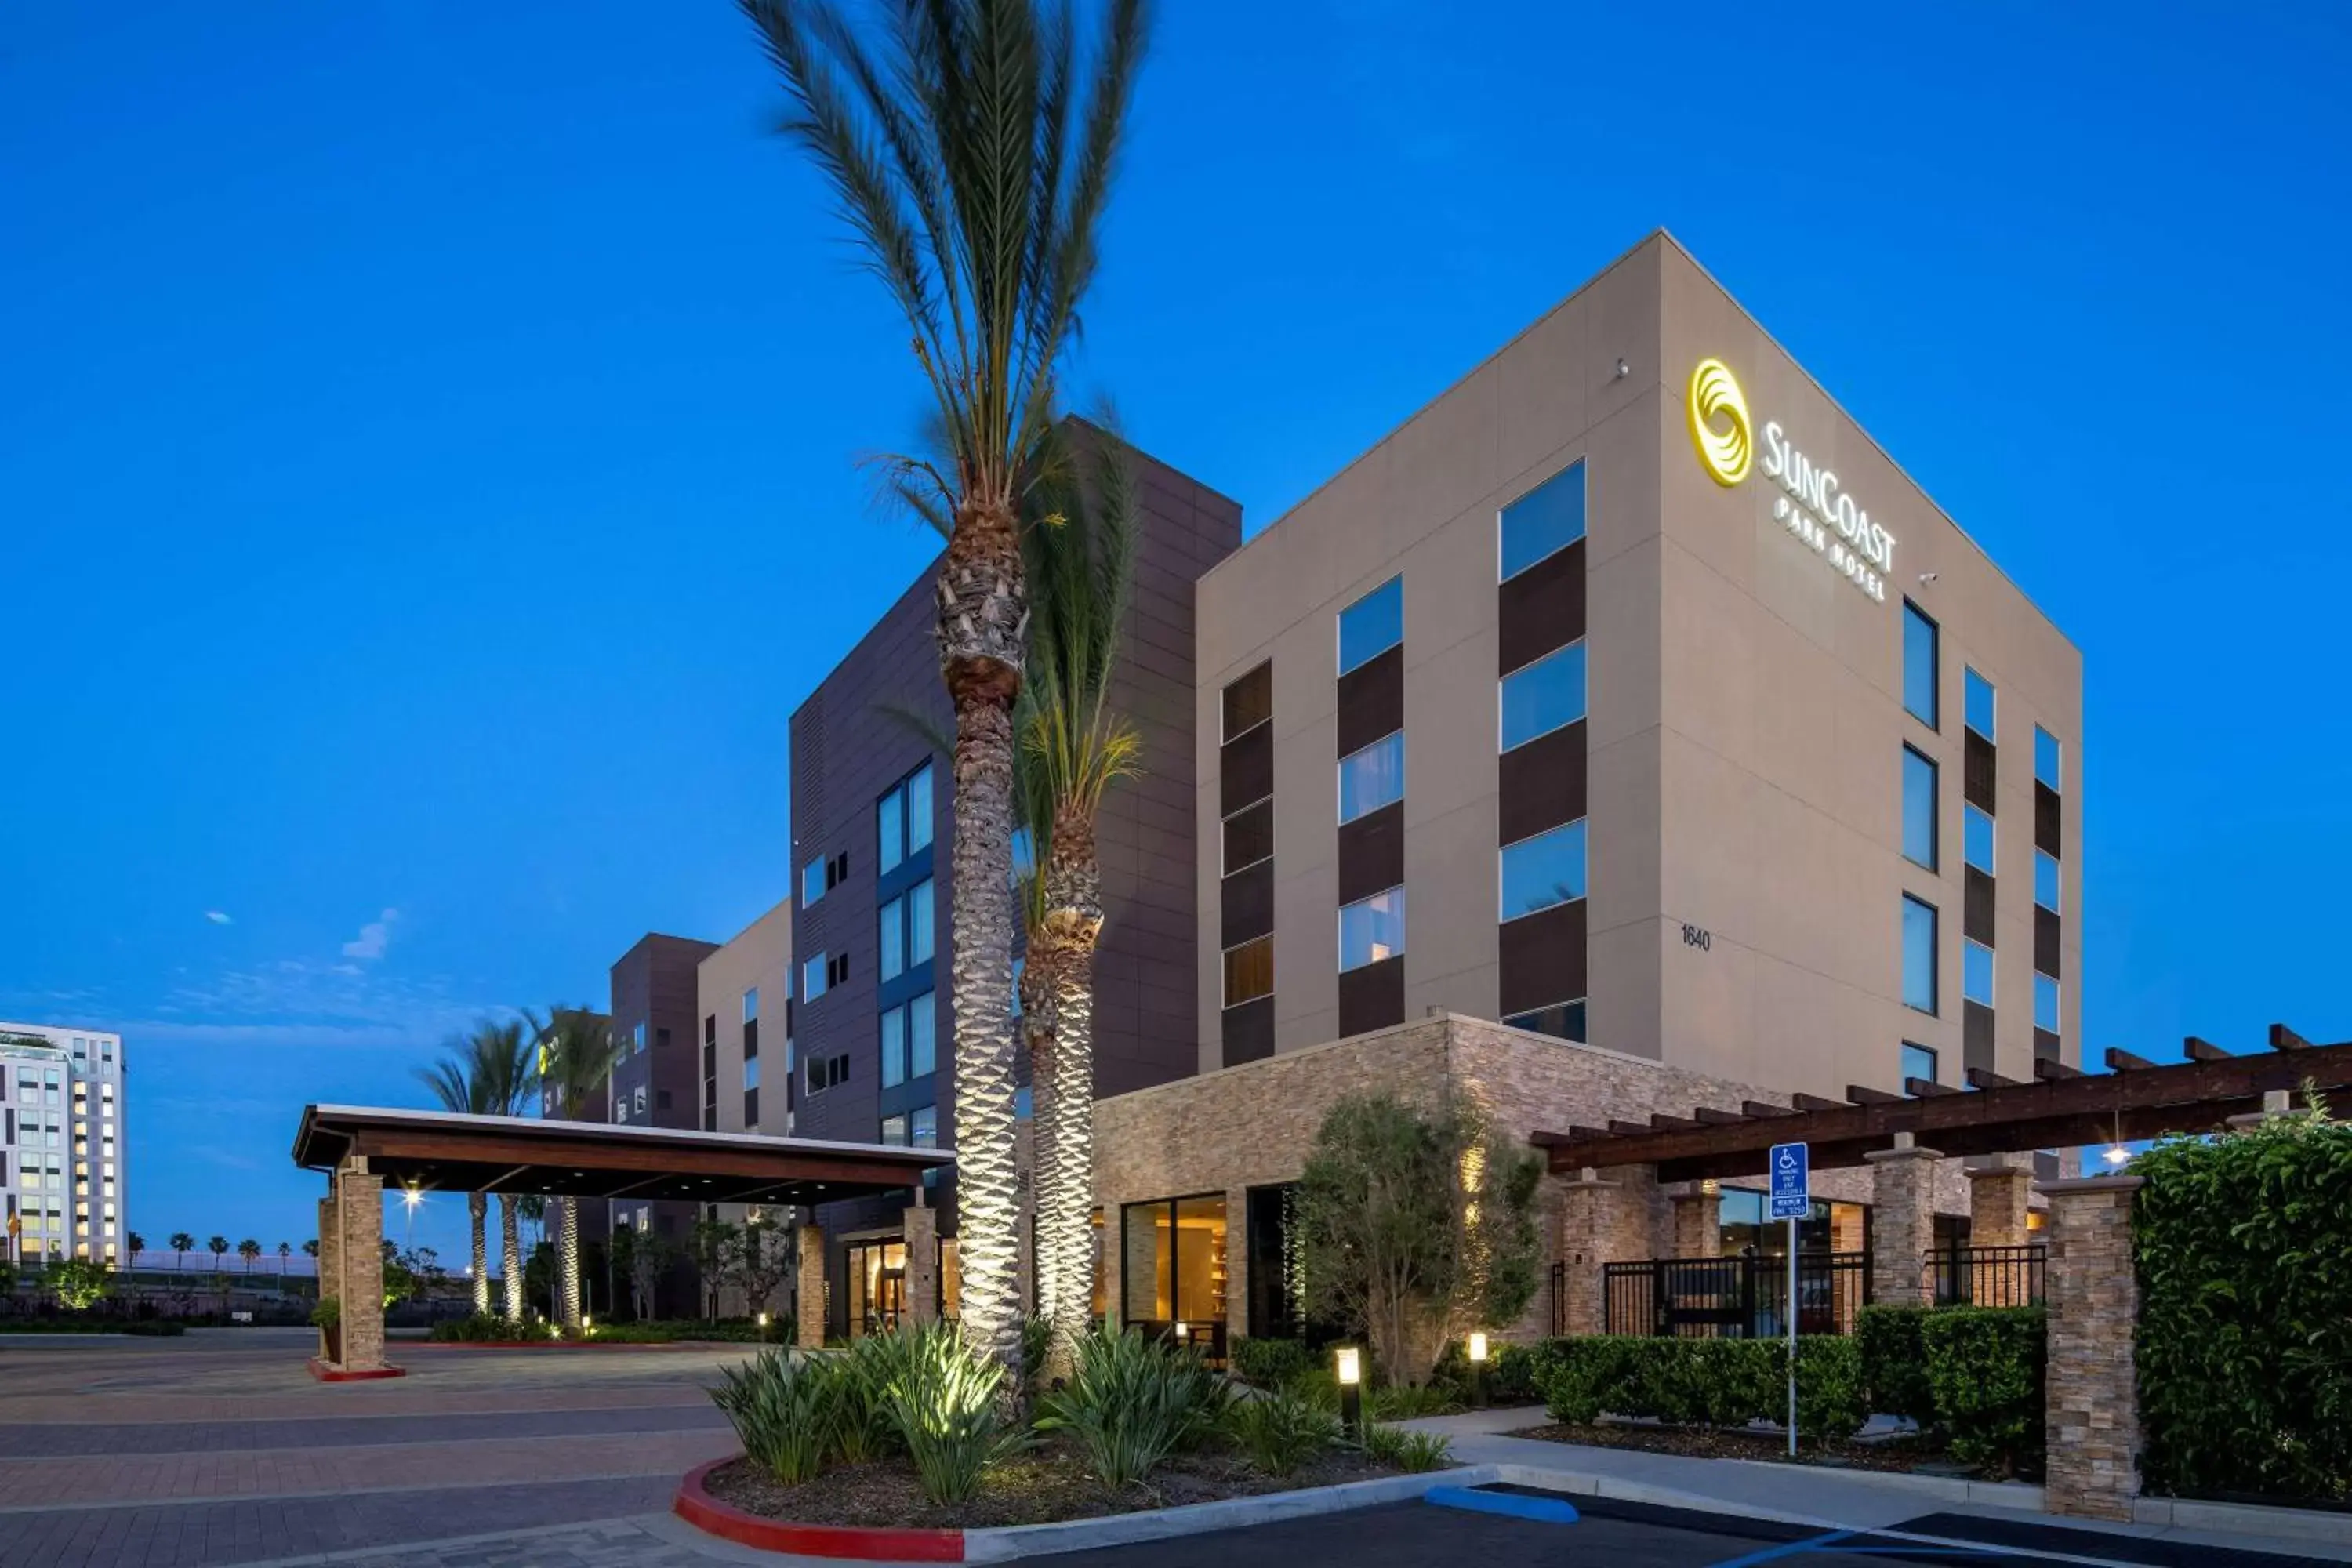 Property Building in SunCoast Hotel Anaheim, Tapestry Collection by Hilton